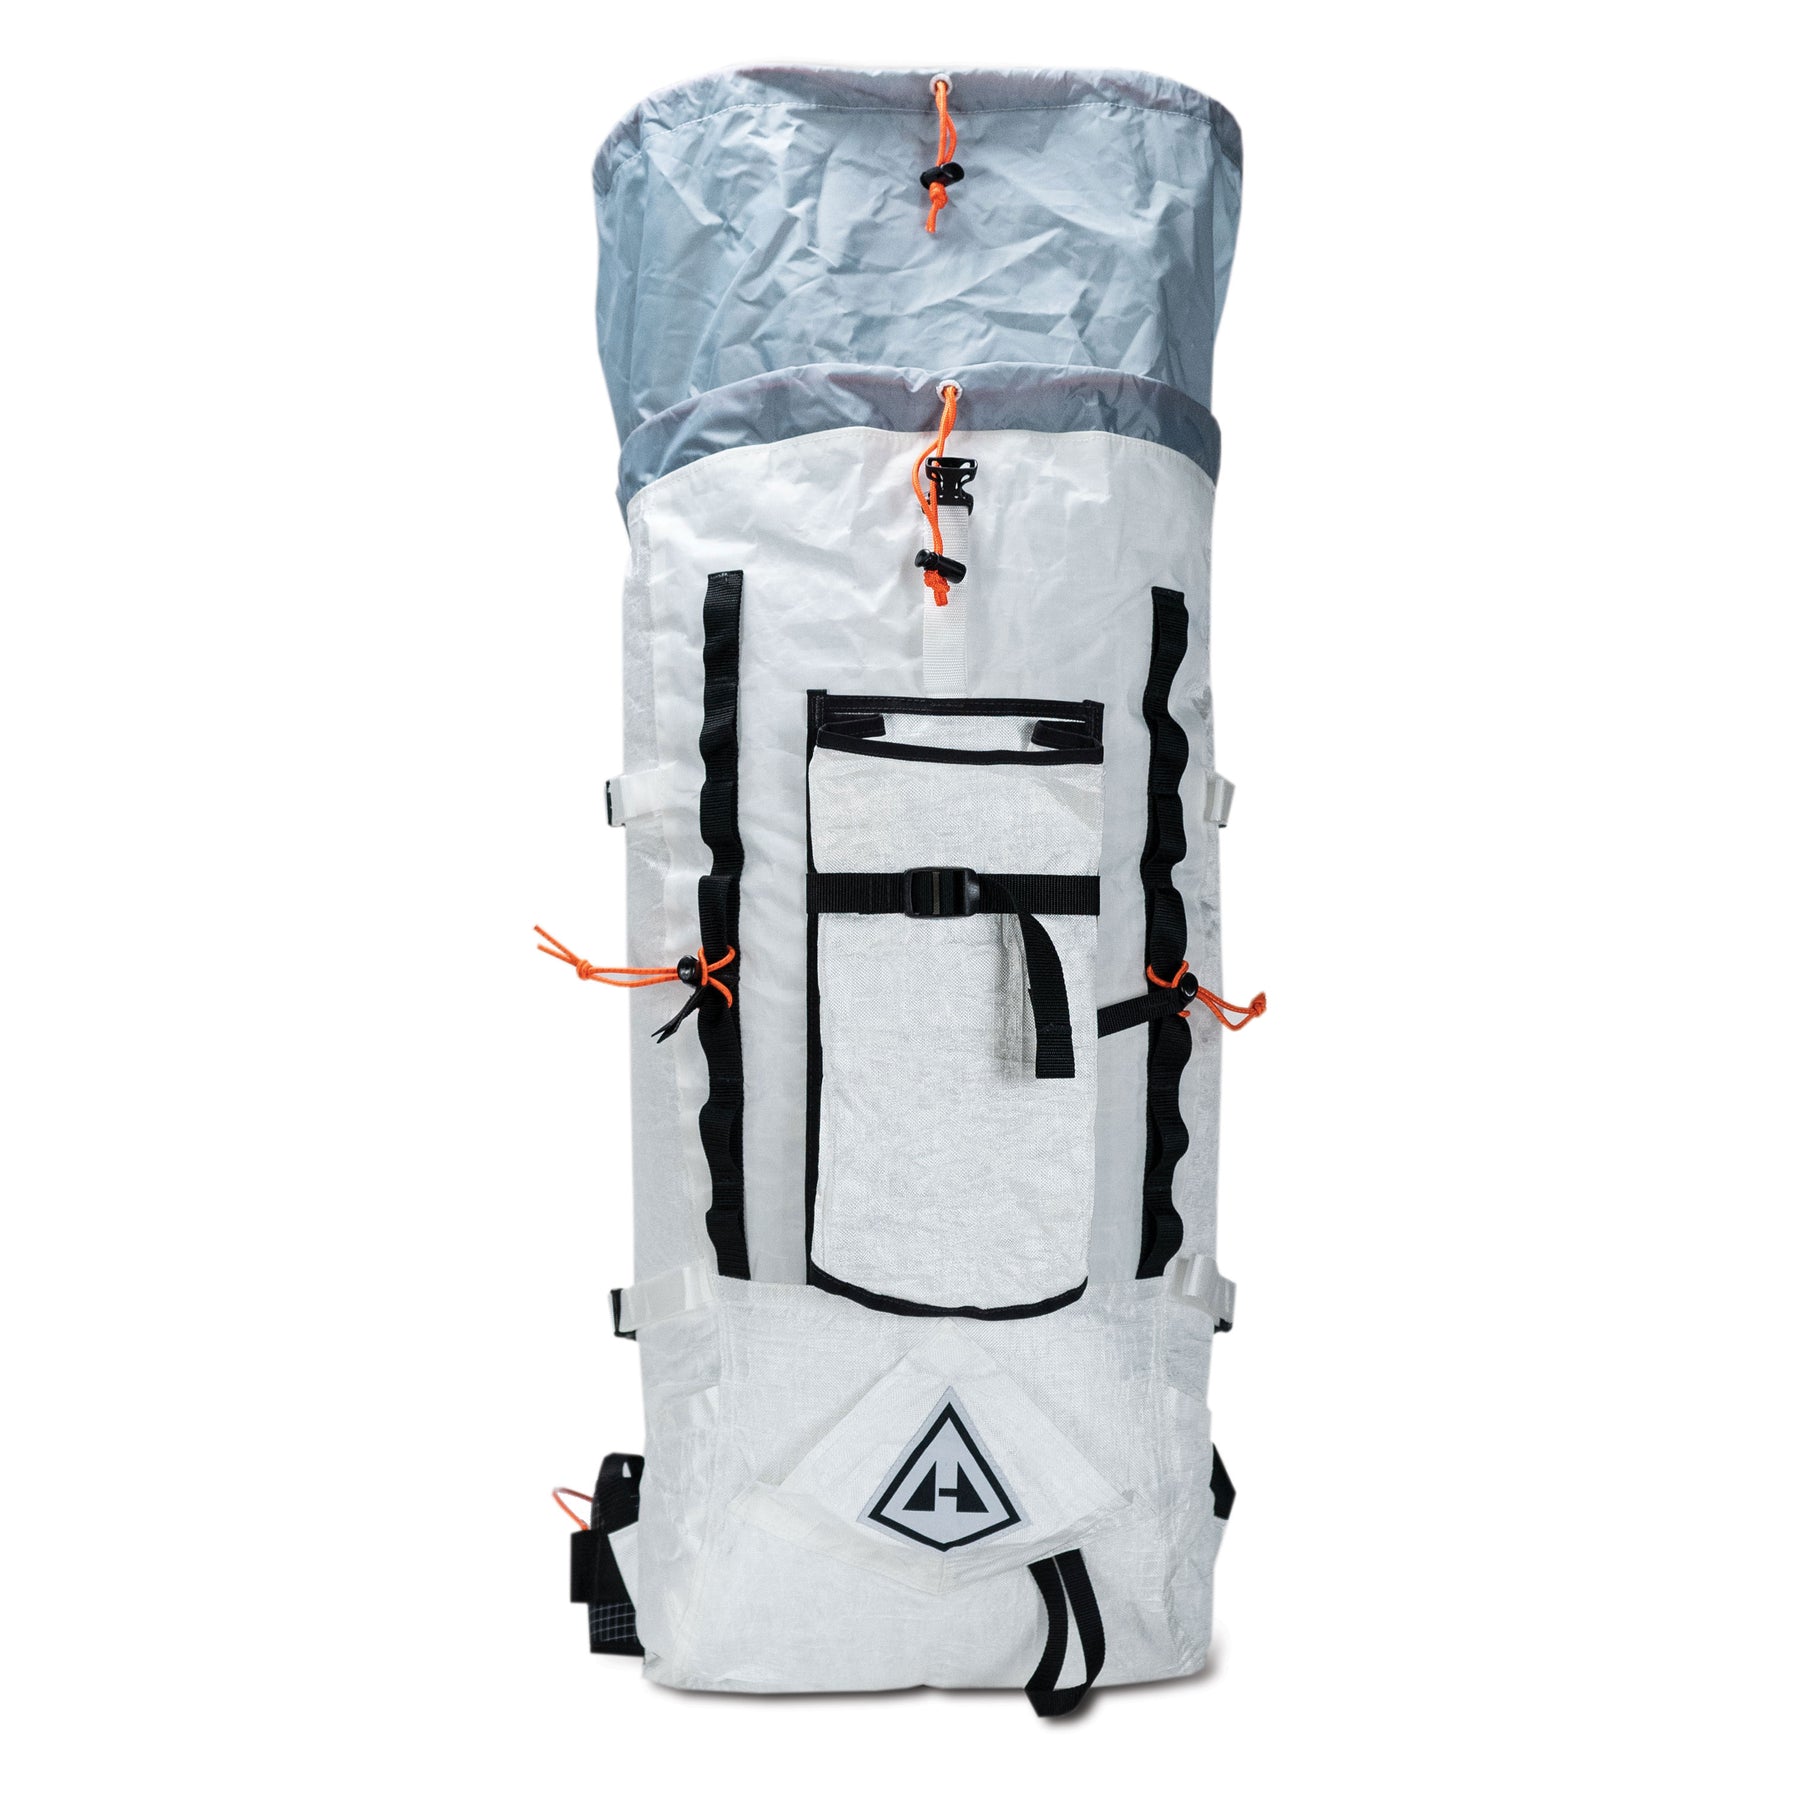 Hyperlite Mountain Gear Prism Pack 40L Mountaineering Backpack